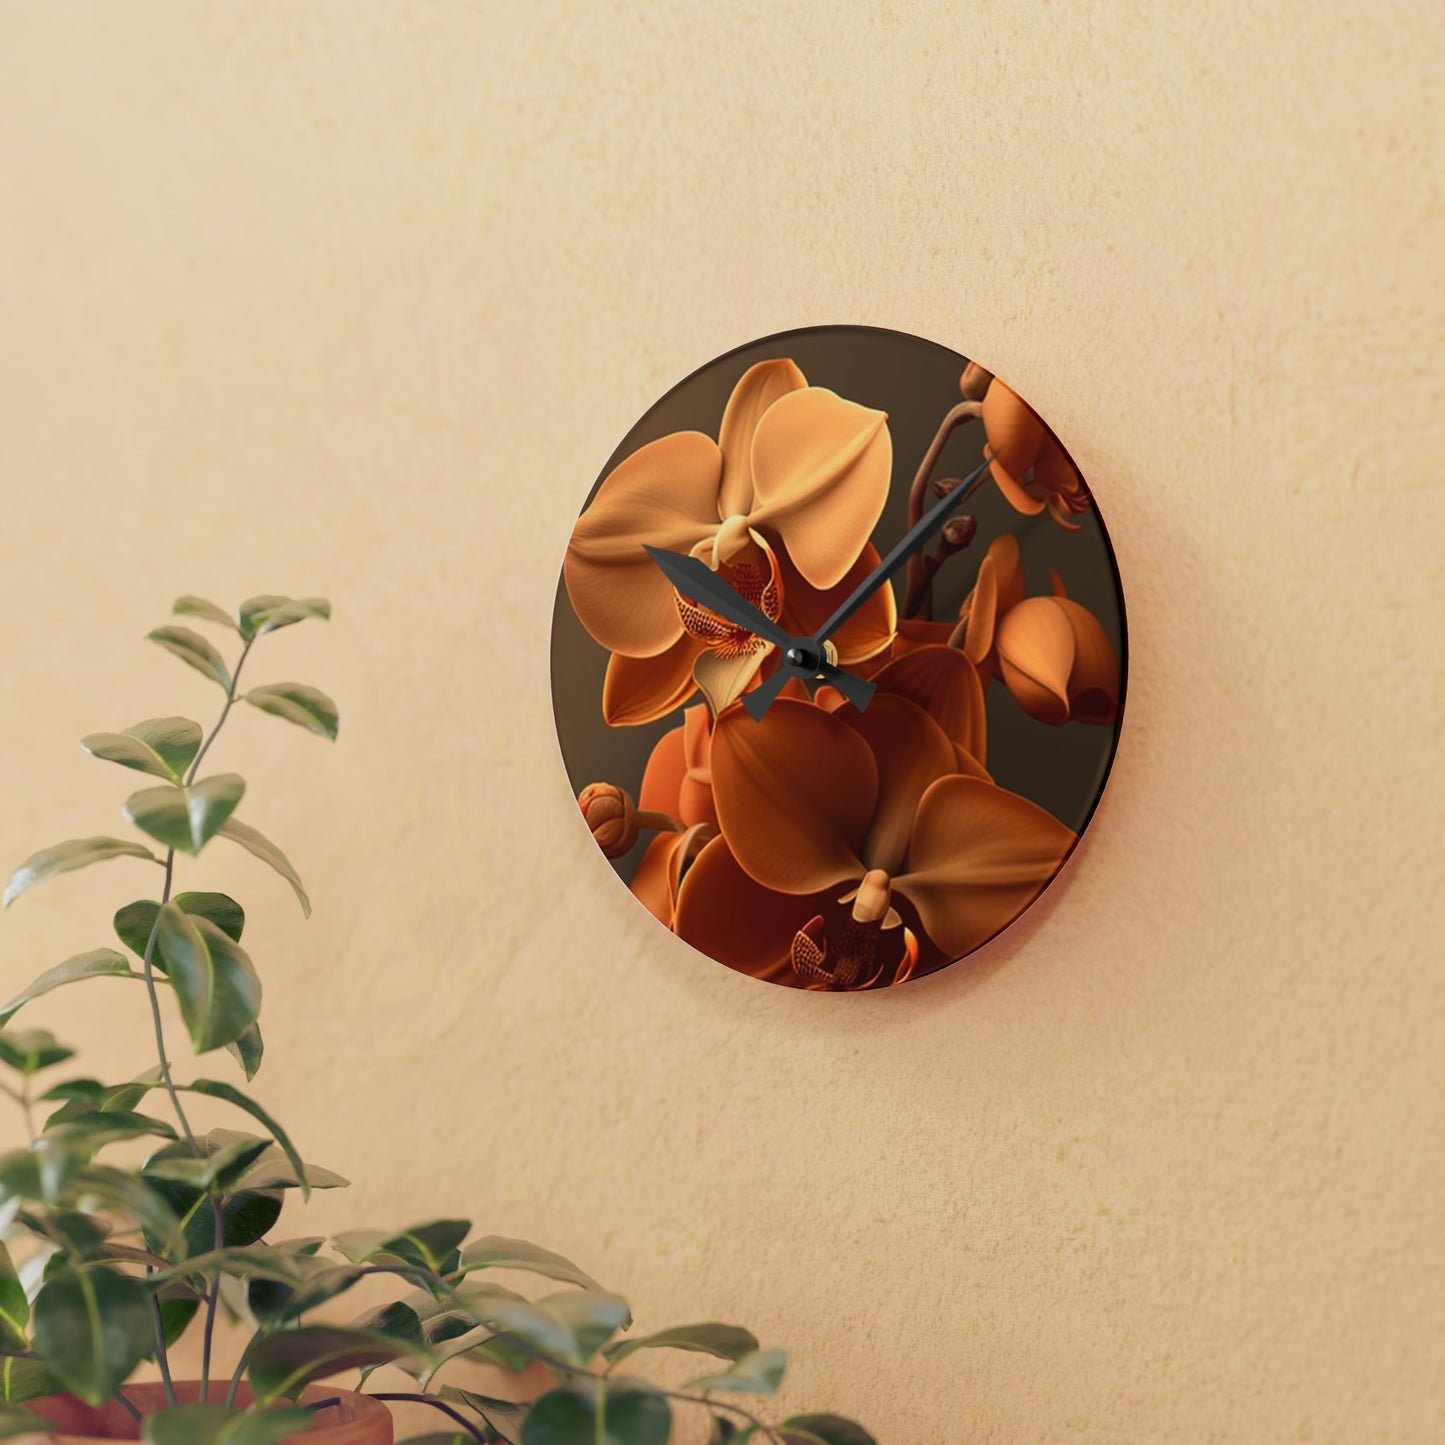 Acrylic Wall Clock orchid pedals 4